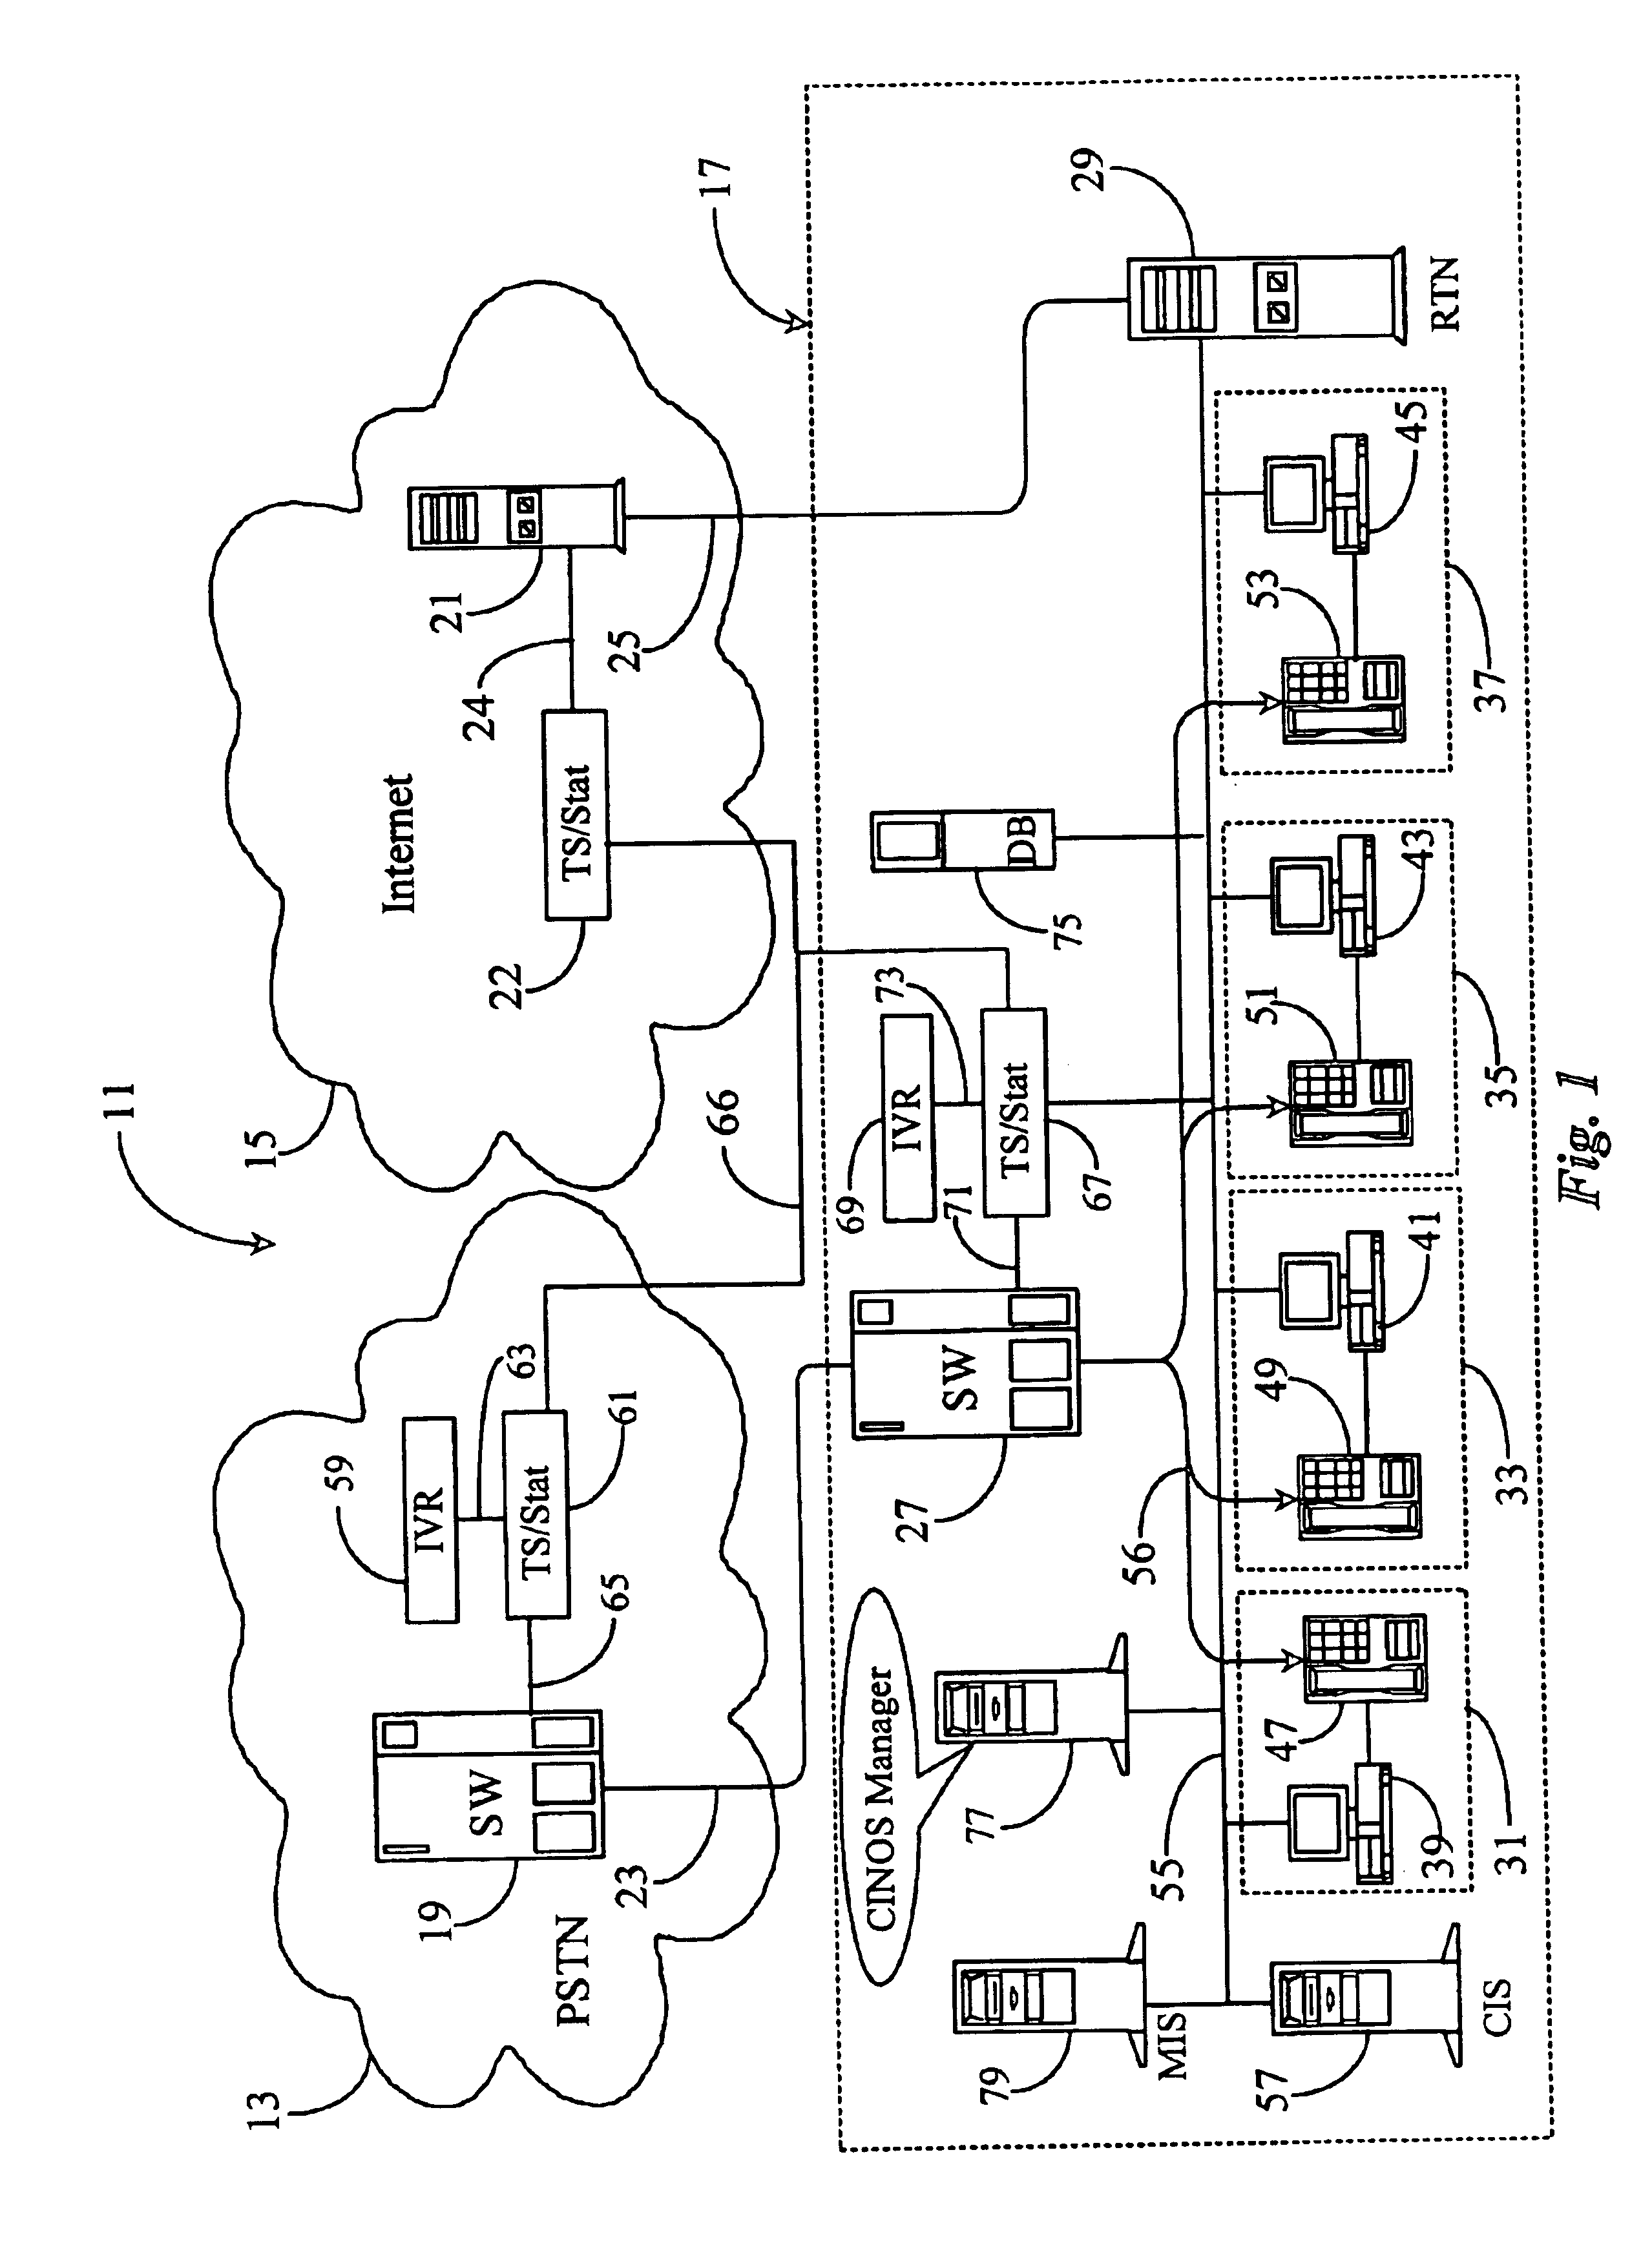 Method and apparatus for providing media-independent self-help modules within a multimedia communication-center customer interface